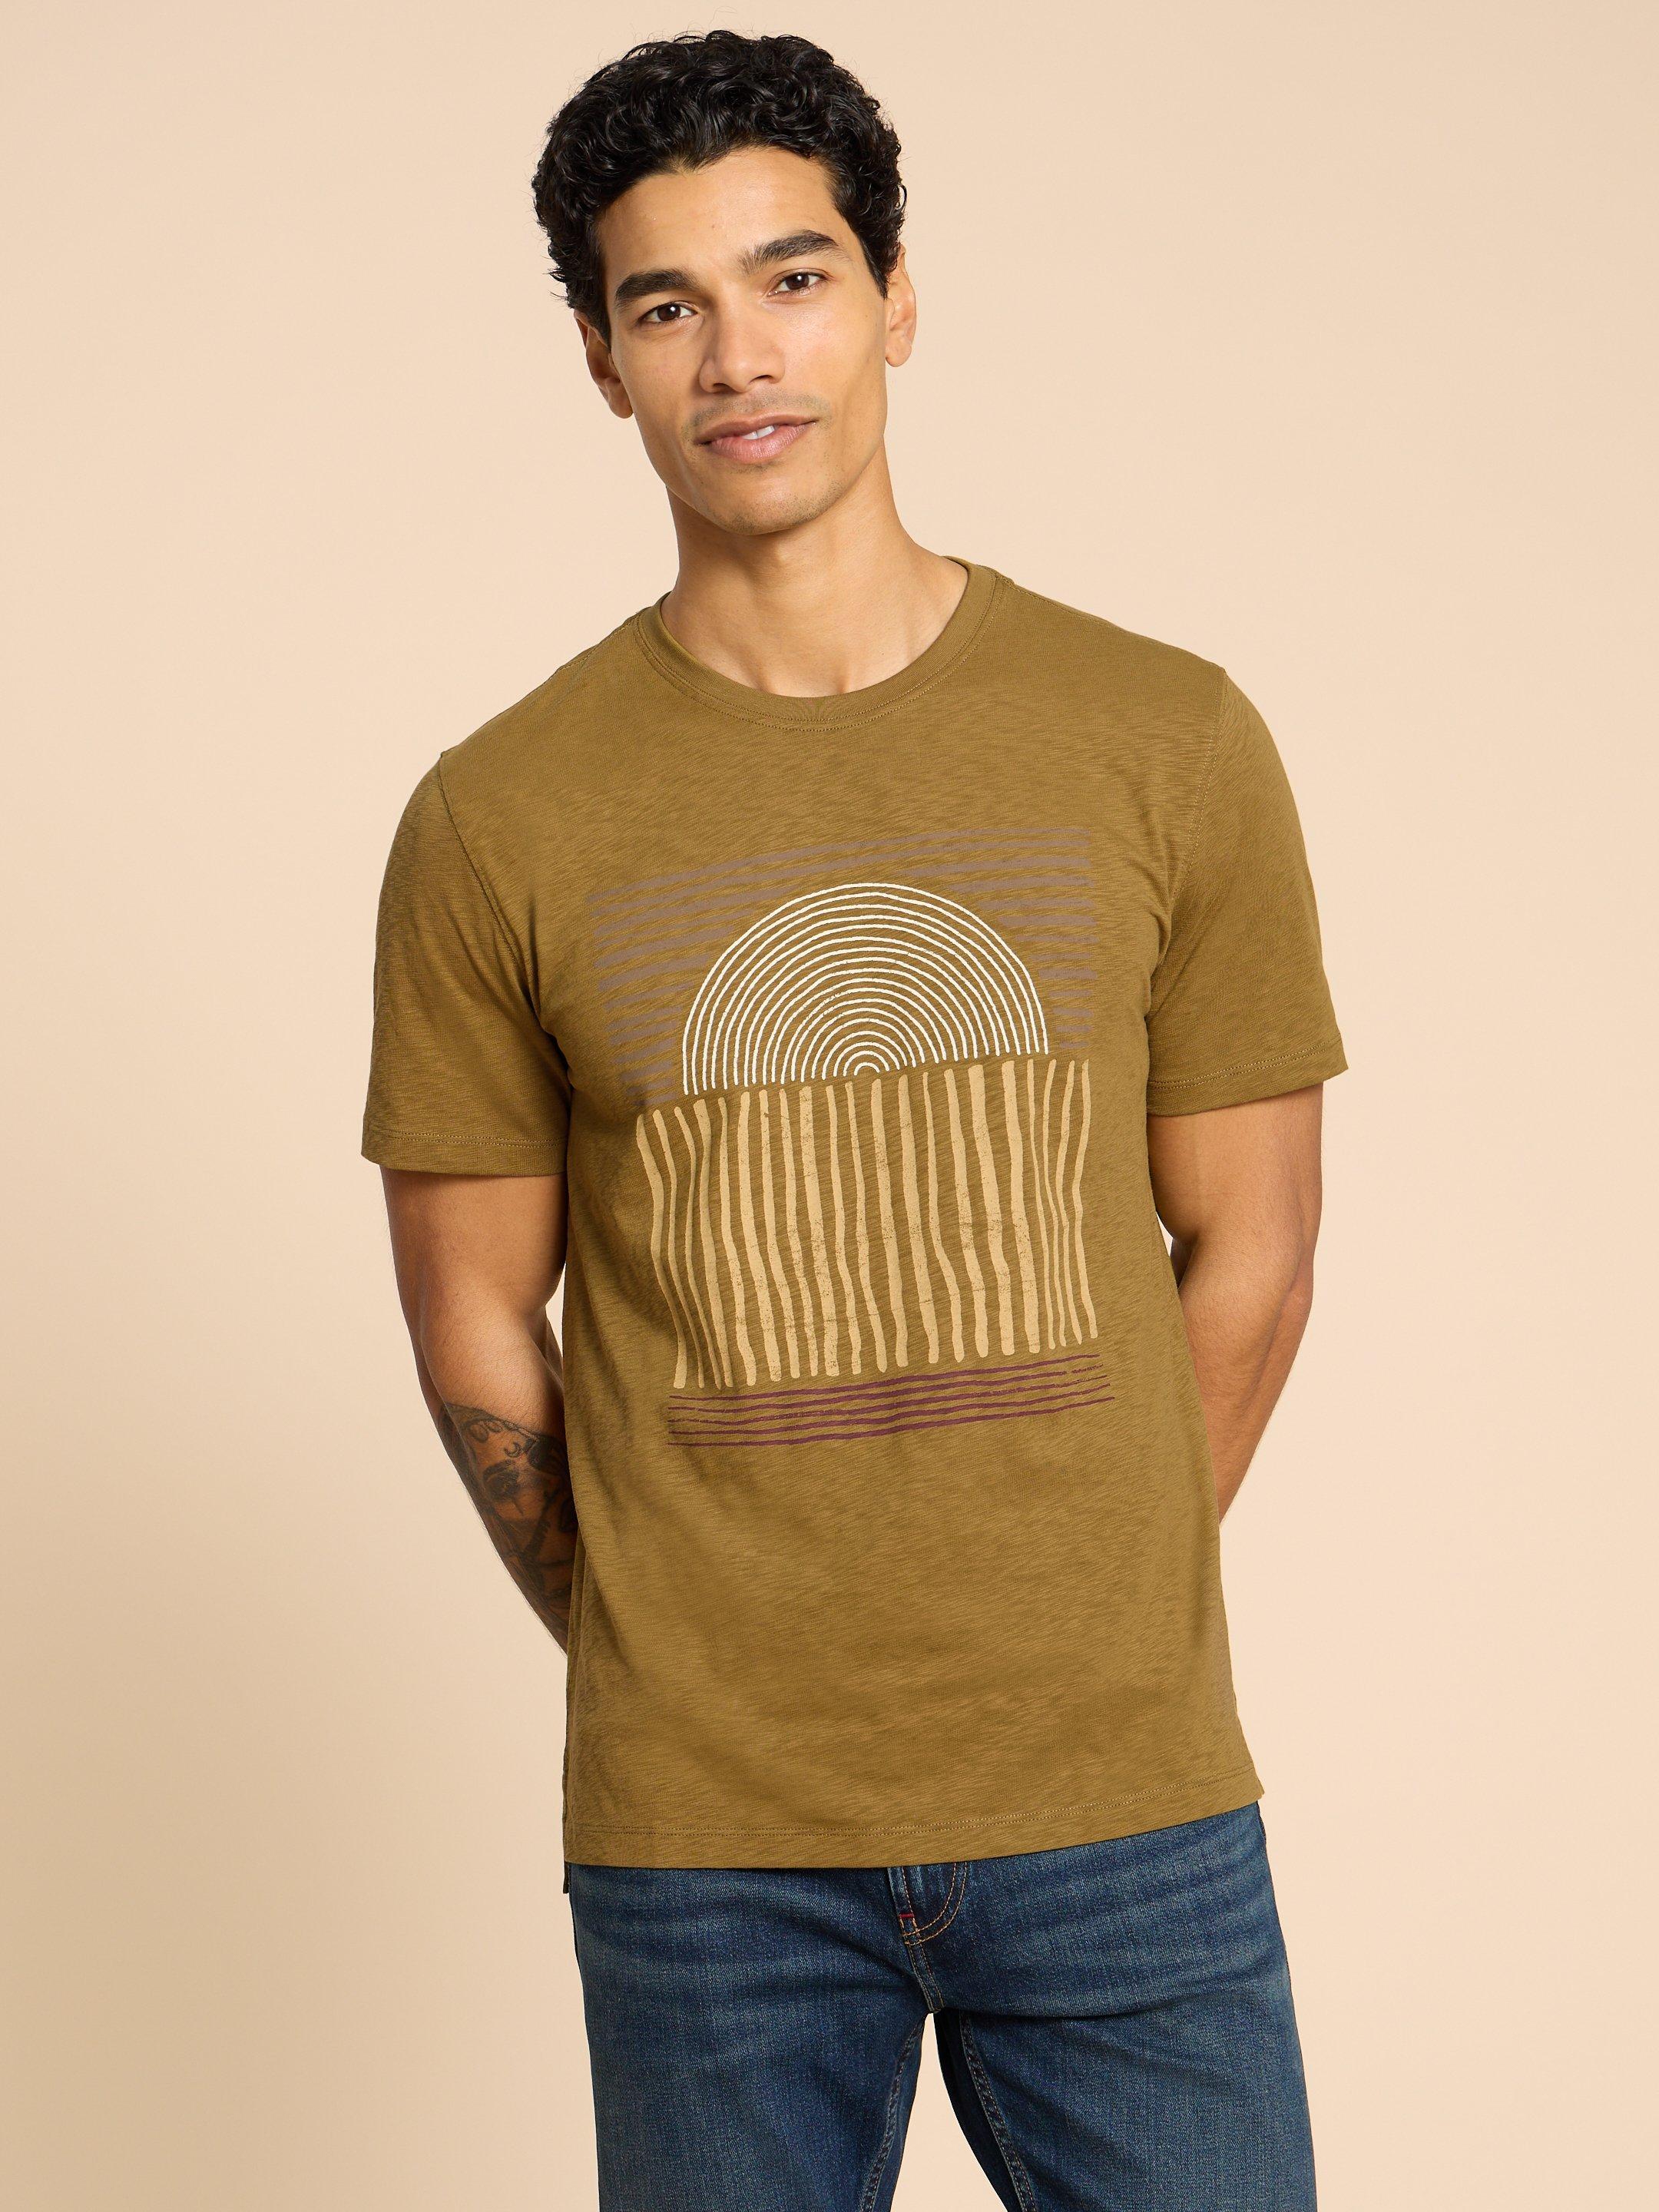 Abstract Sun Graphic Tee in GREEN PR - MODEL FRONT